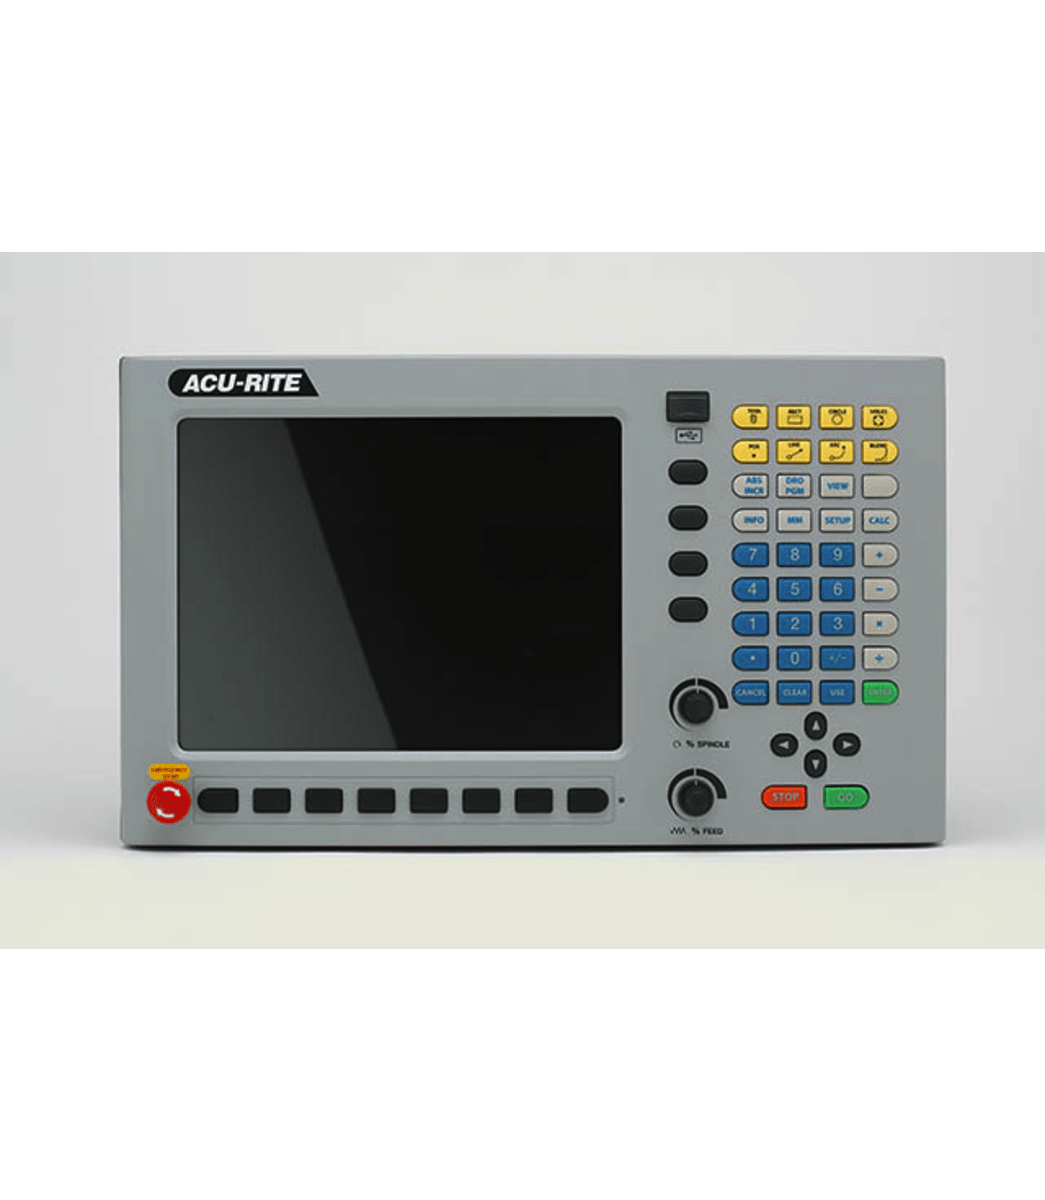 JTM-1050EVS2/230 Mill With 3-Axis Acu-Rite MilPwr G2 CNC Controller - Jet